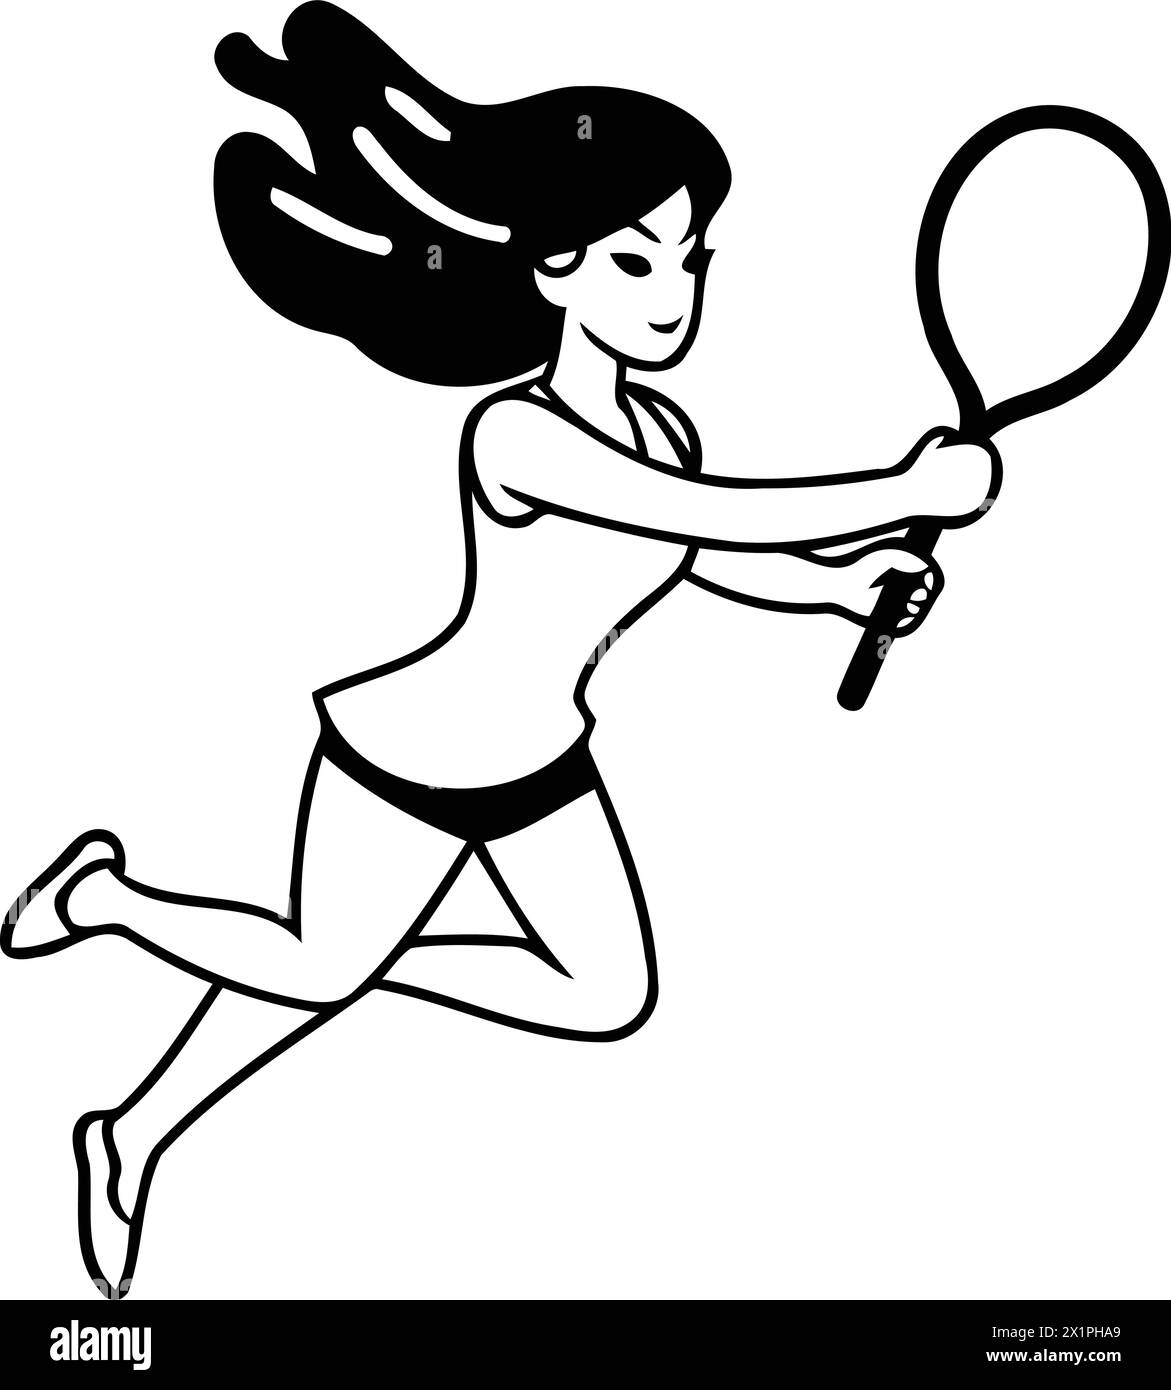 Tennis player woman with racket. Cartoon vector illustration isolated ...